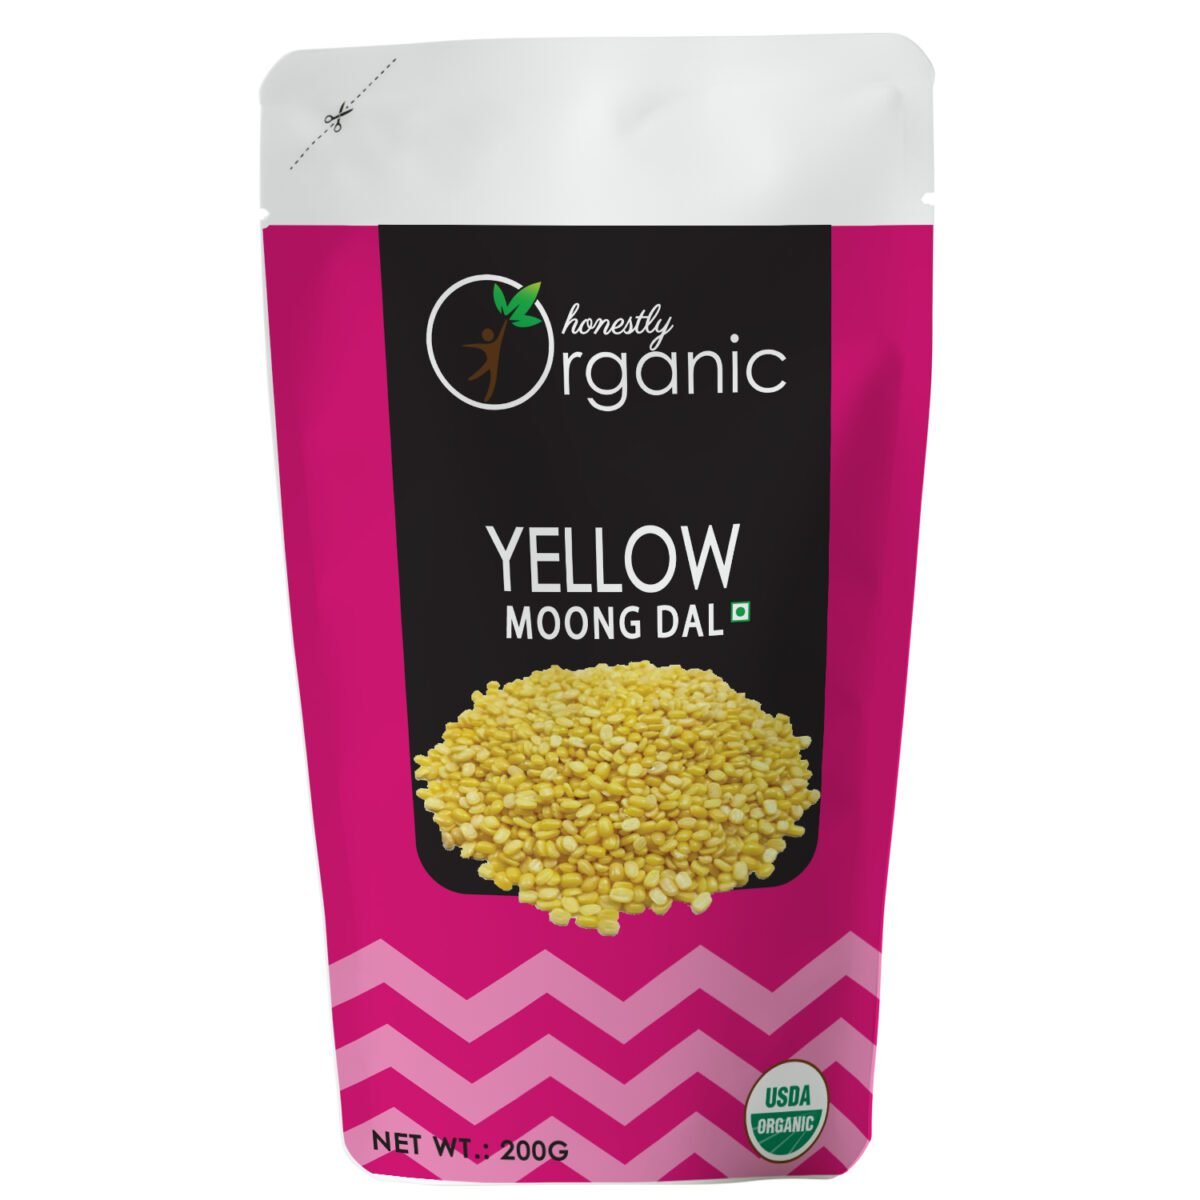 yellow moong dal -Front1-d alive